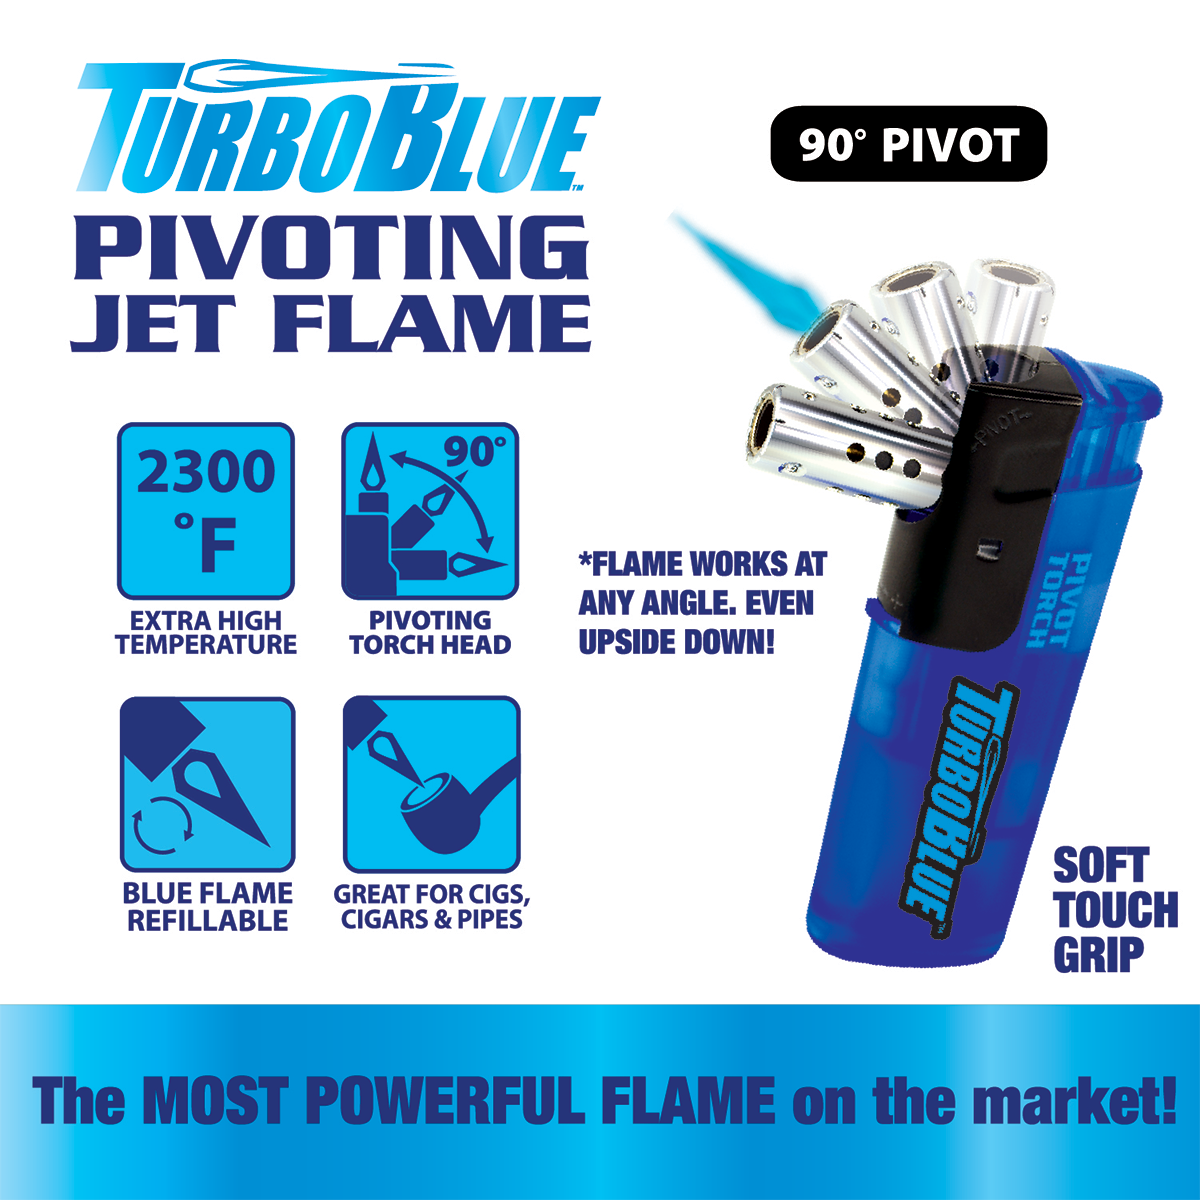 Jet Flame Pivot Head Torch Lighter - 7 Pieces Per Retail Ready Display 41529